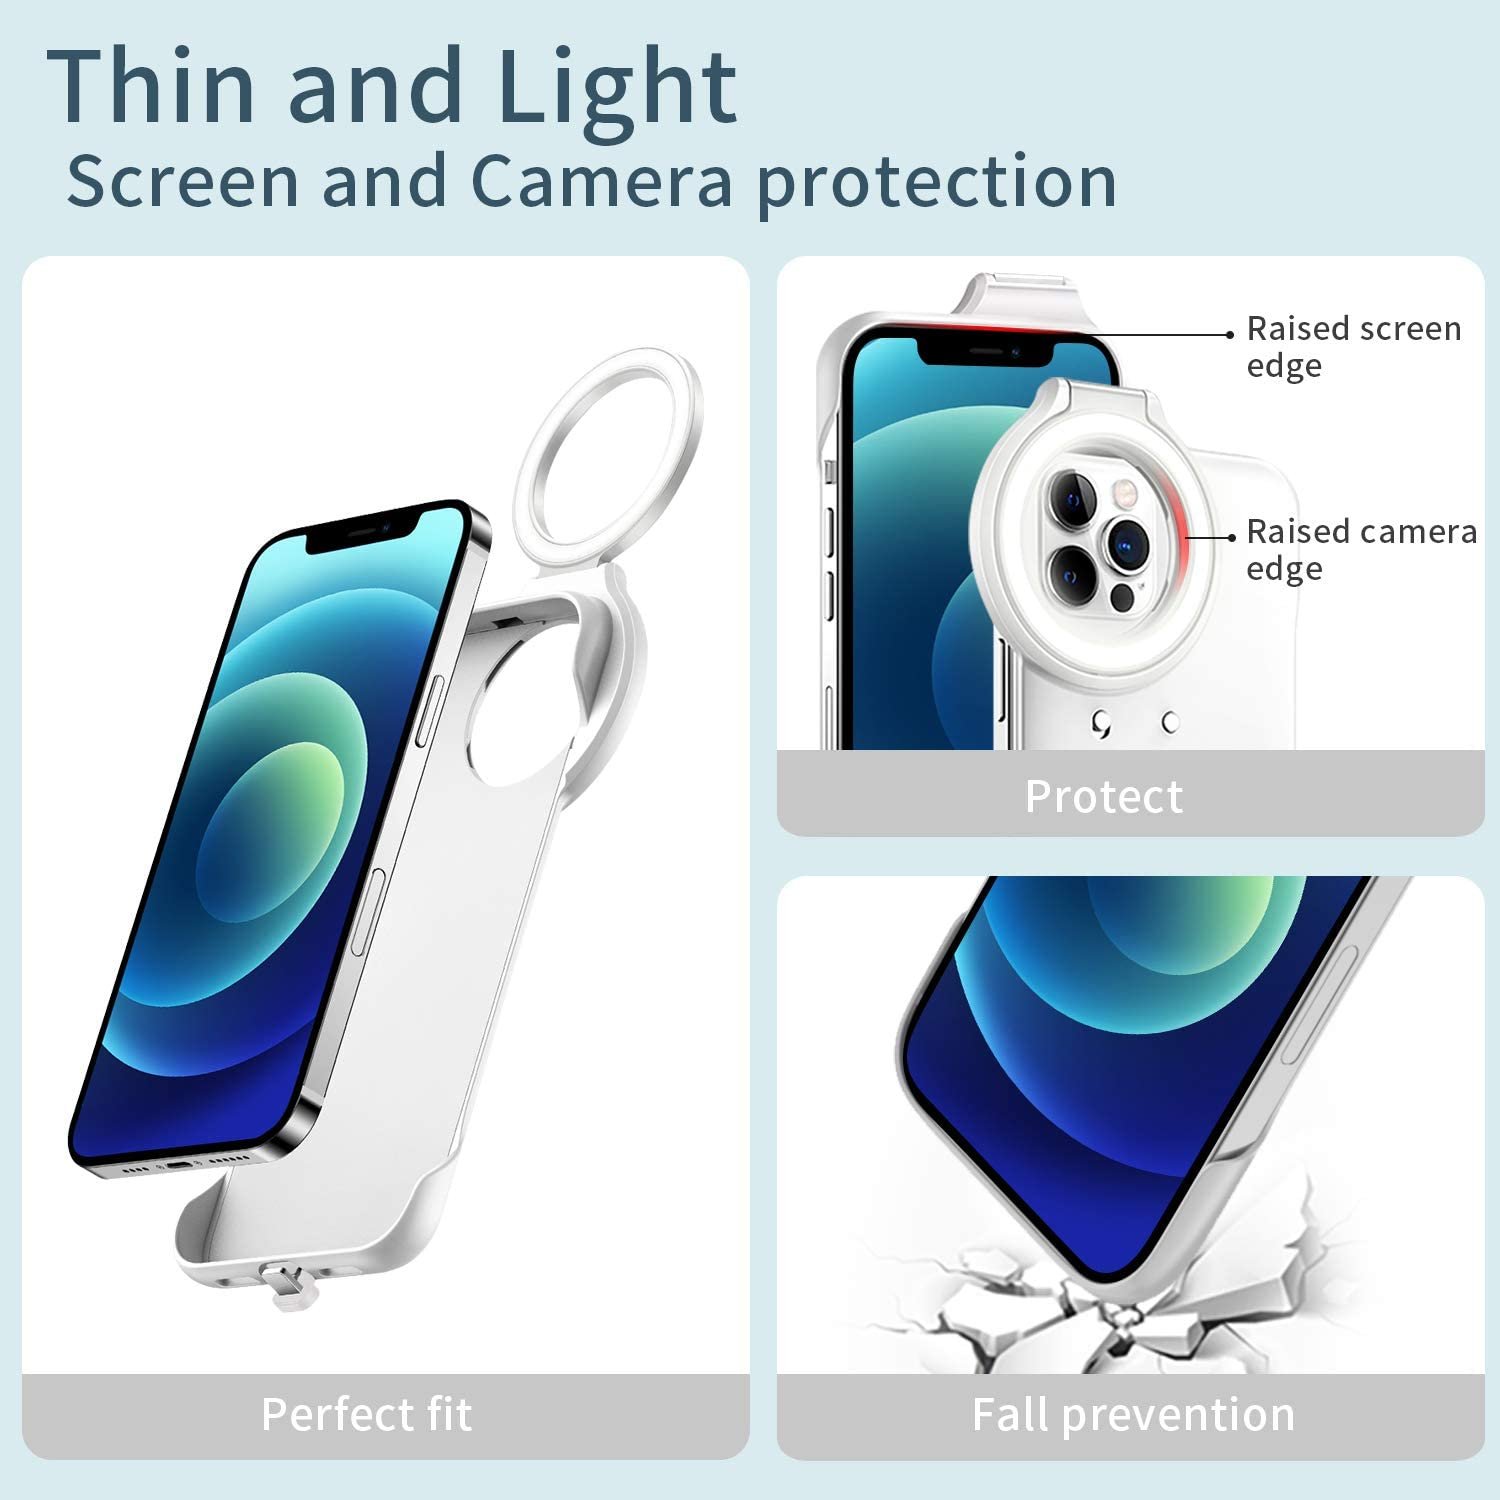 LED Ring Light Case For iPhones - Plug.tech